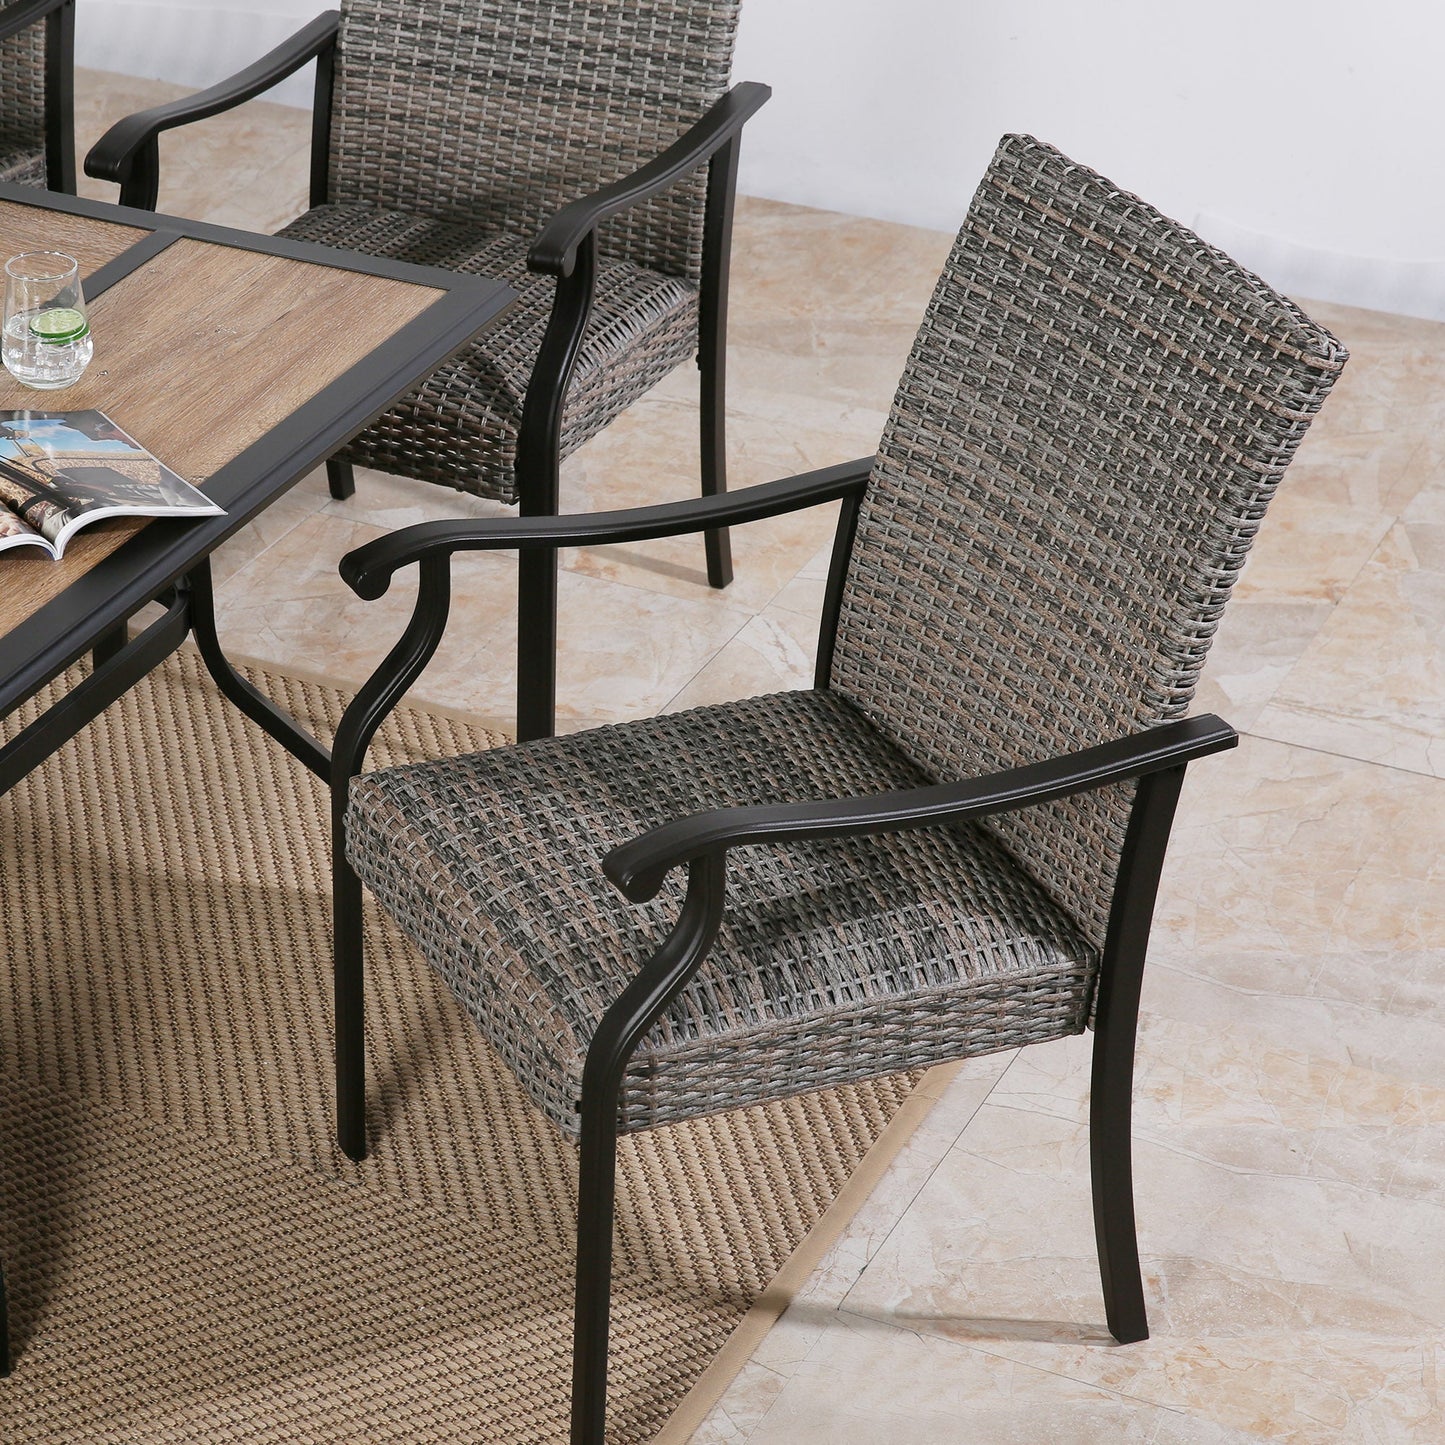 Patio 6 Pieces Wicker Padded Dining Chair Indoor Outdoor Metal Armchair with Quick Dry Foam